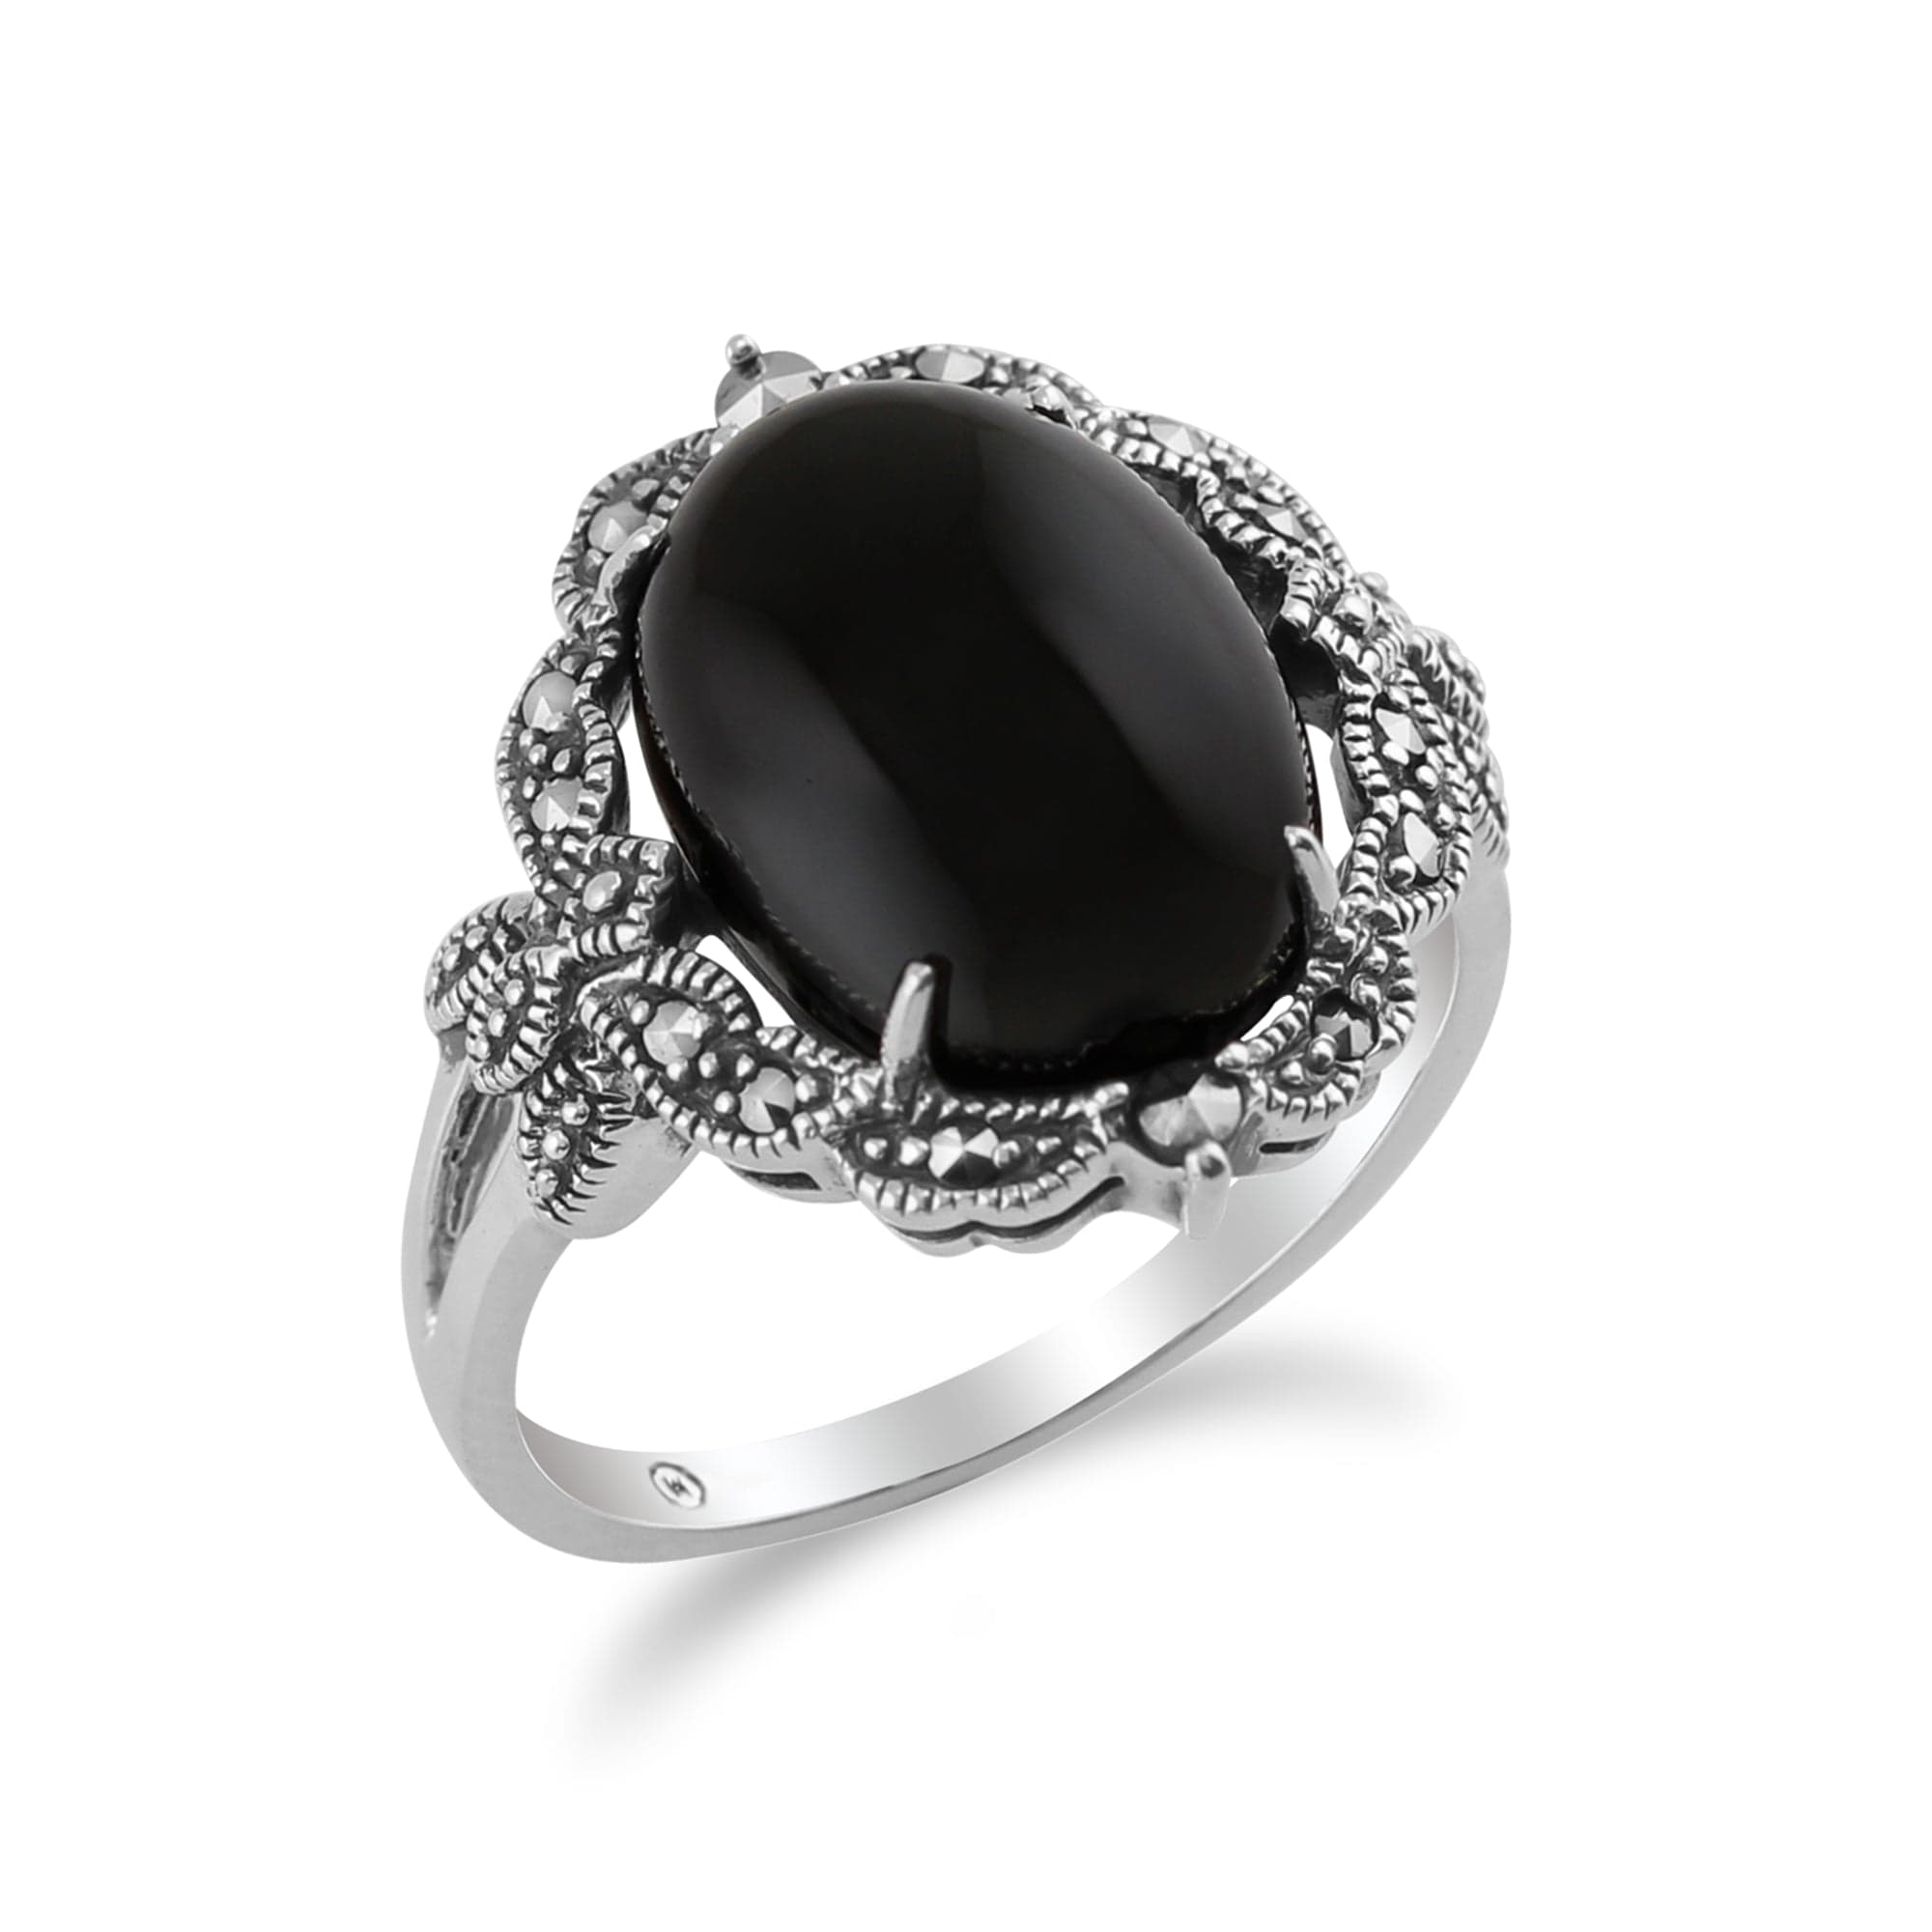 Art Nouveau Style Oval Black Onyx Cabochon & Marcasite Statement Ring in 925 Sterling Silver - Gemondo